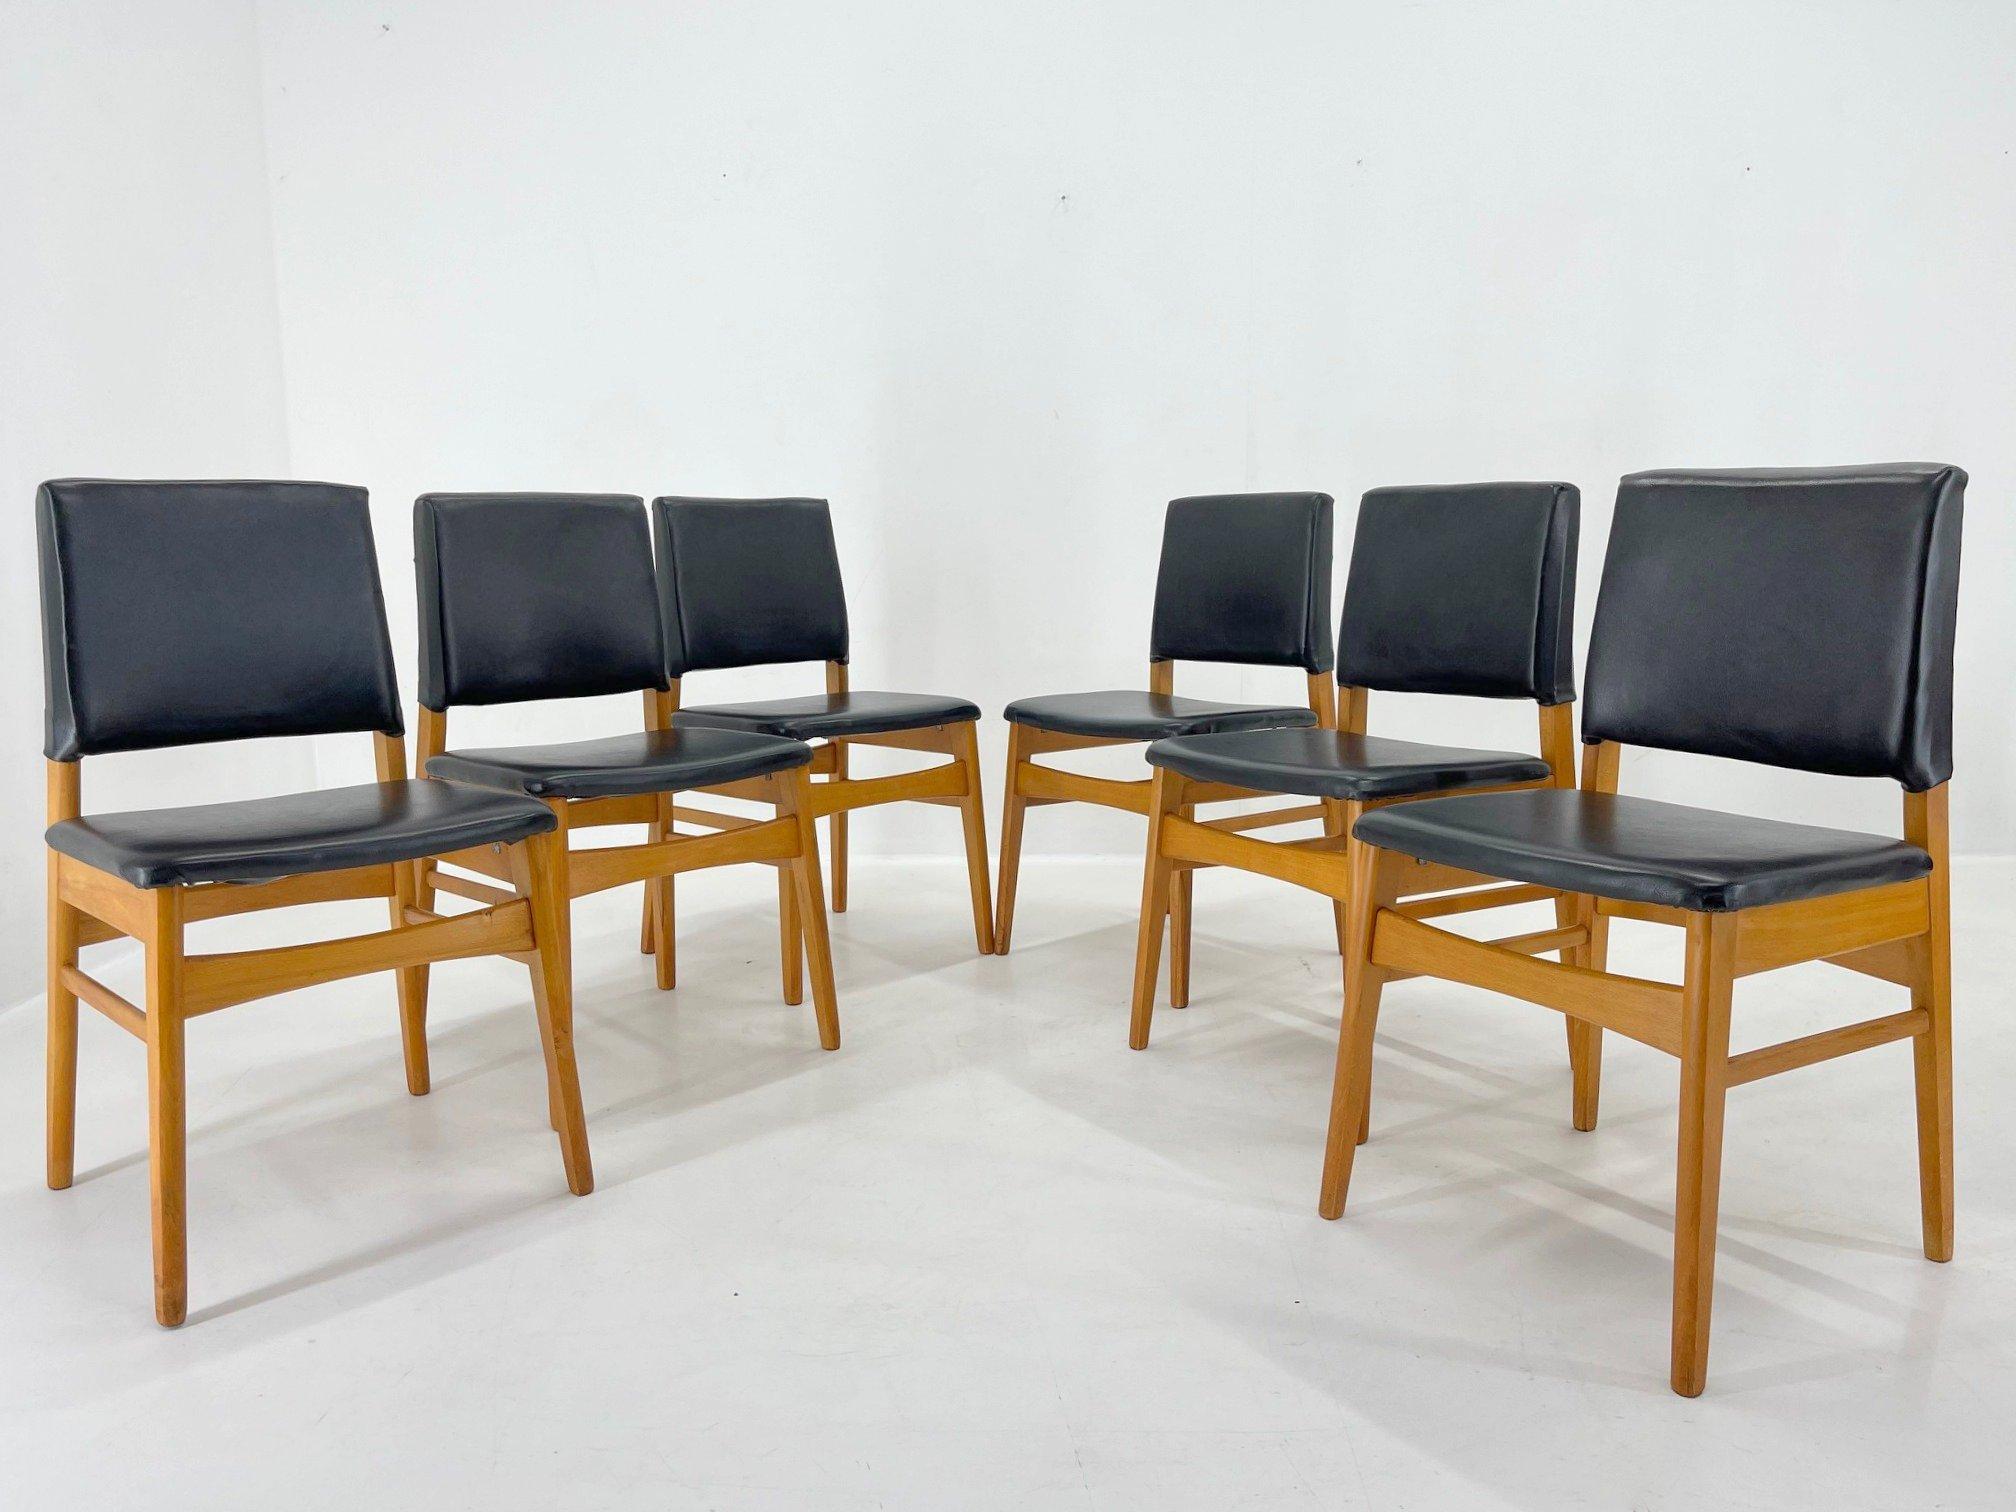 Mid-Century Modern Set of 6 Leatherette & Wood Chairs, Czechoslovakia, 1960's For Sale